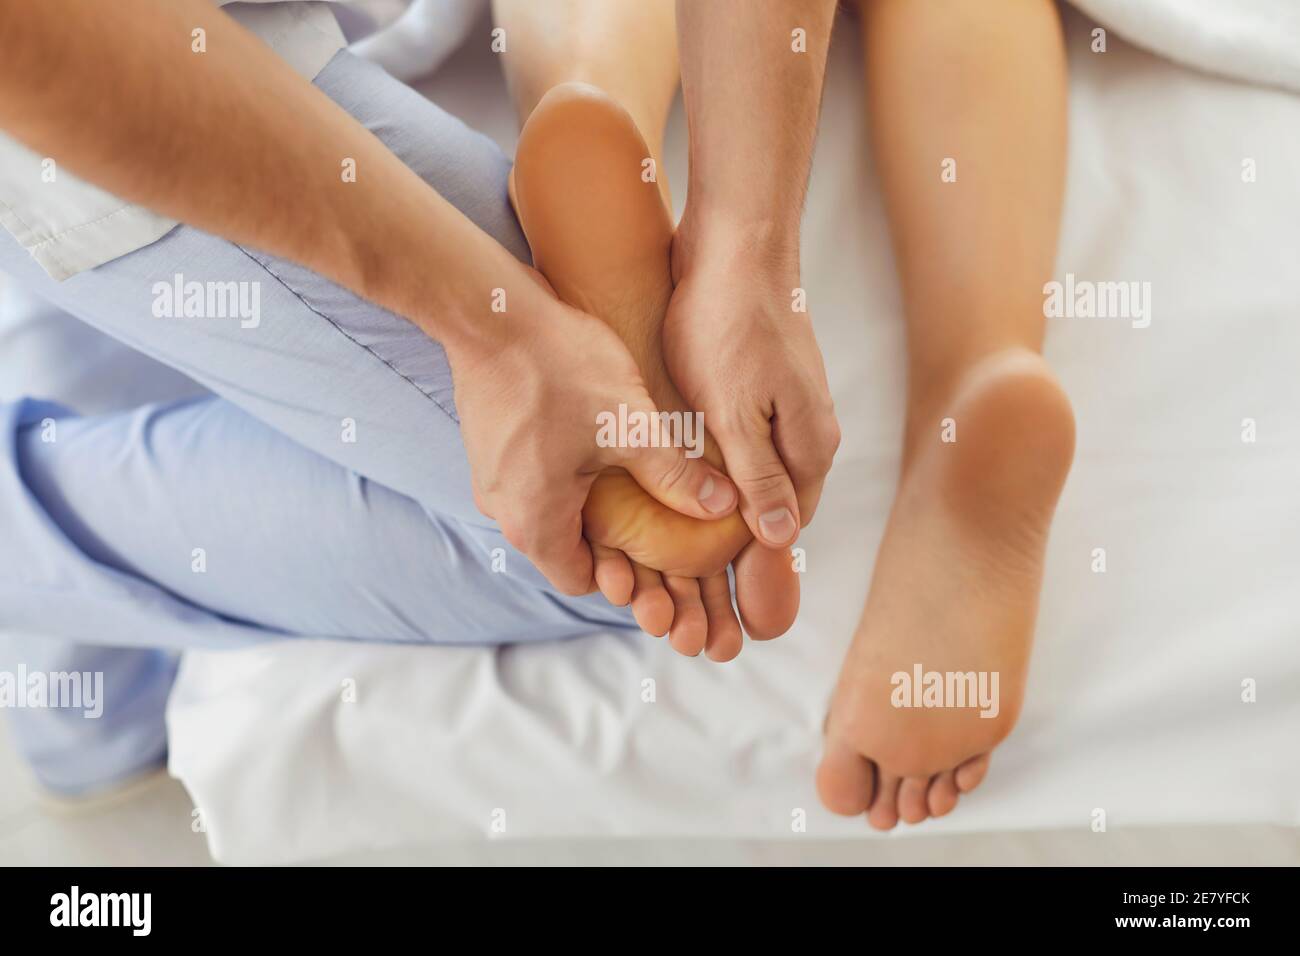 Hands of doctor masseur making manual massage of feet for lying woman Stock Photo